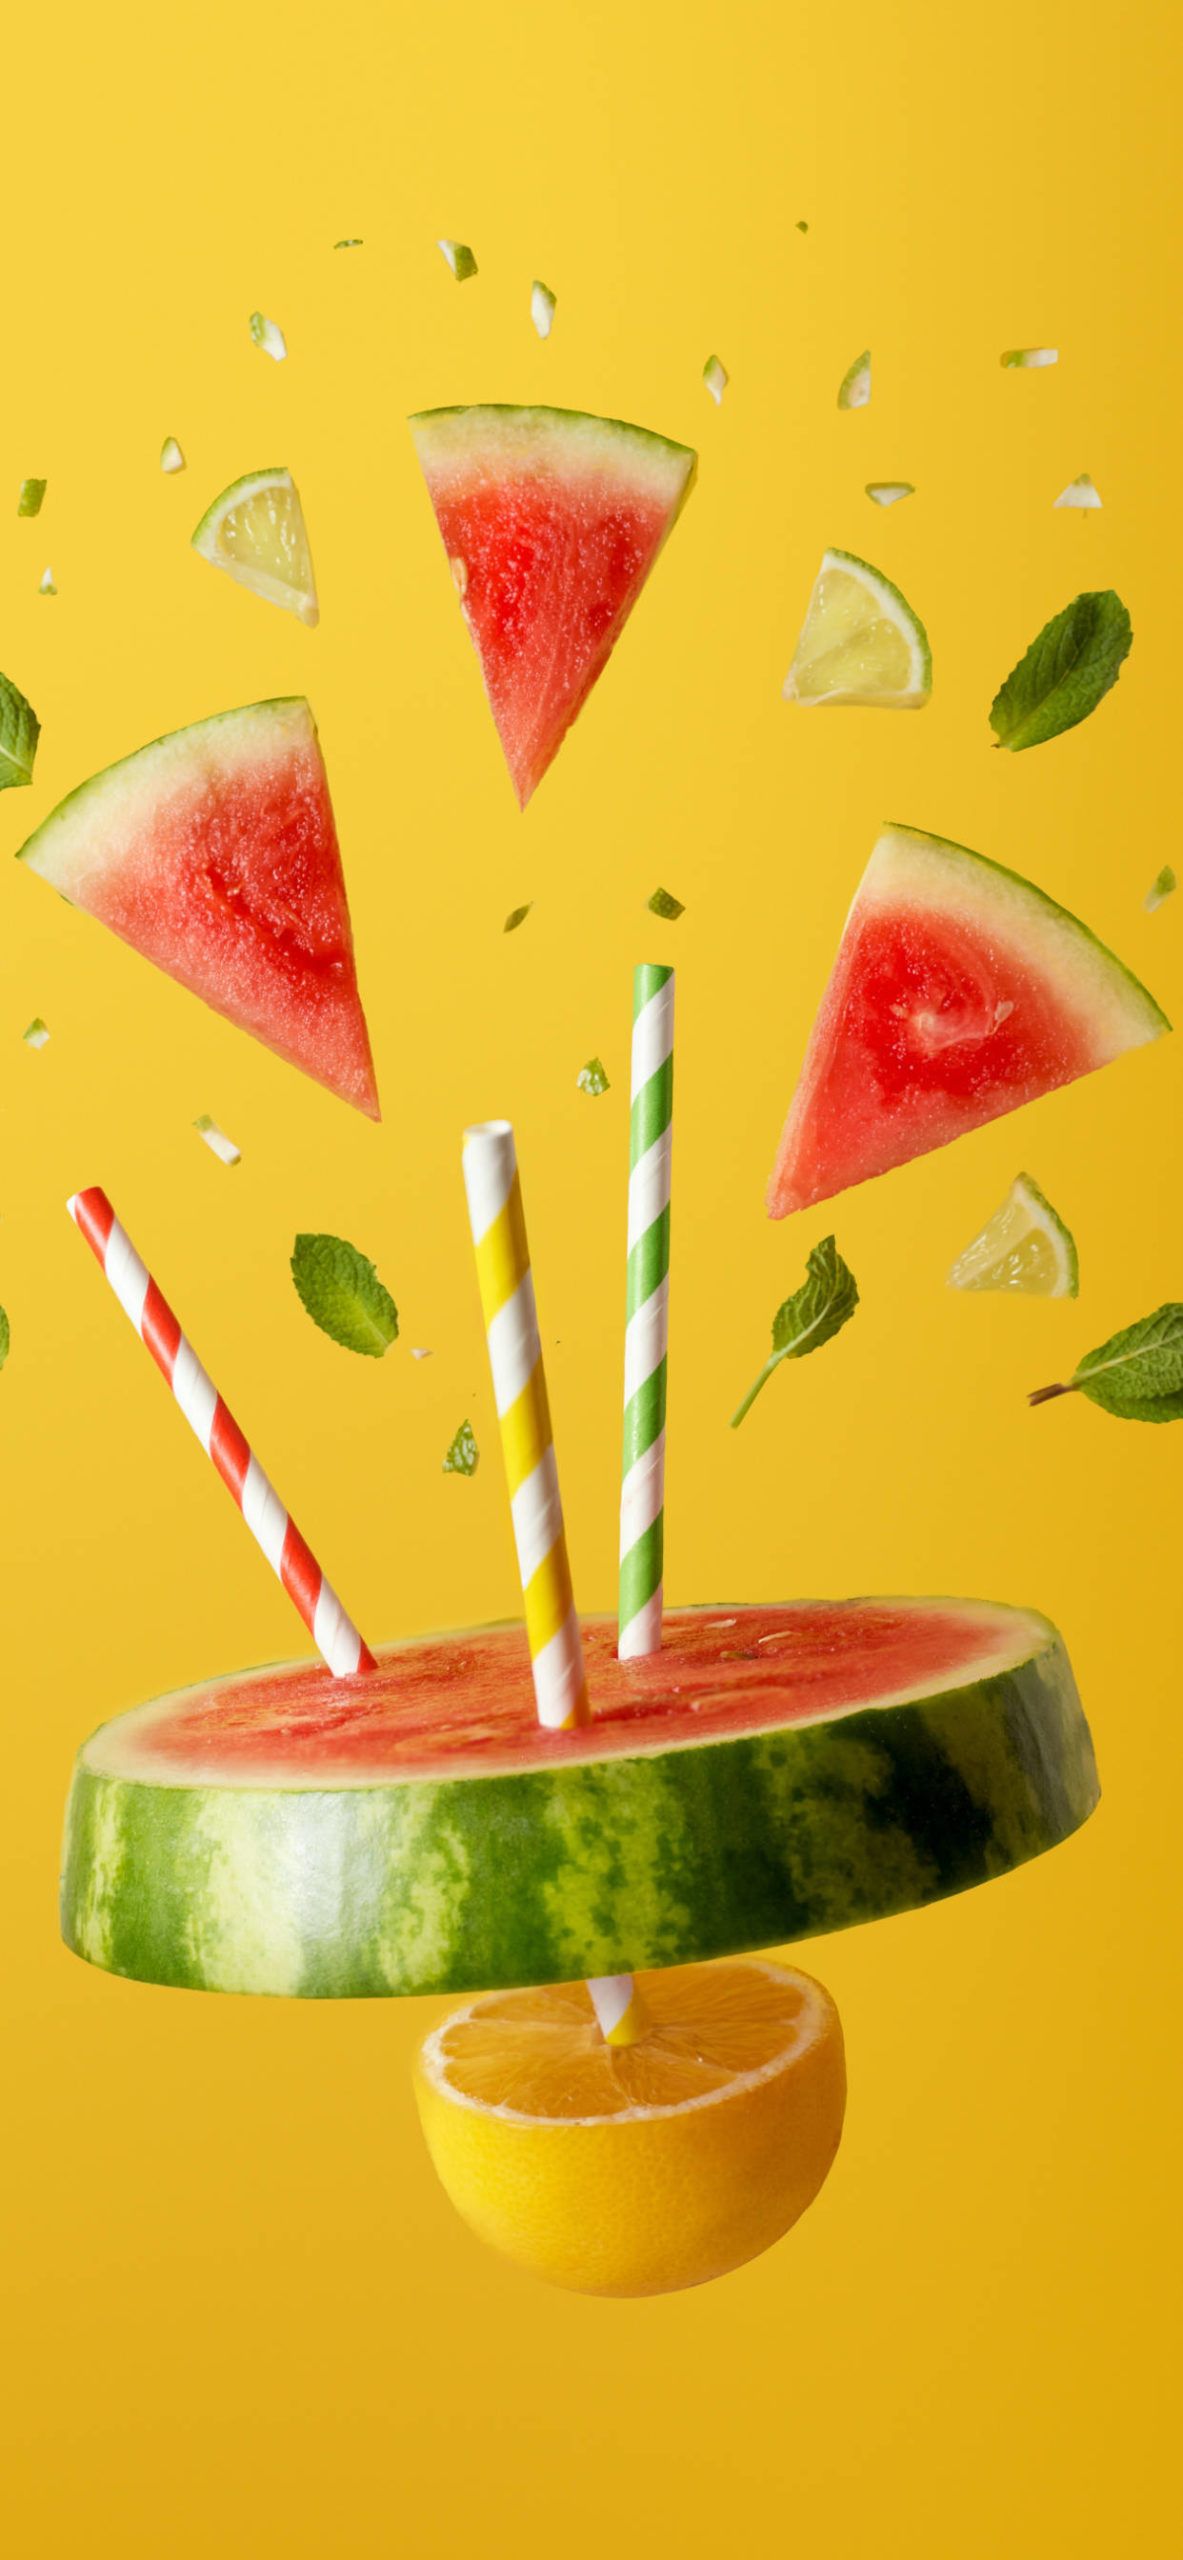 Fruits Wallpaper for iPhone Pro Max, X, 6